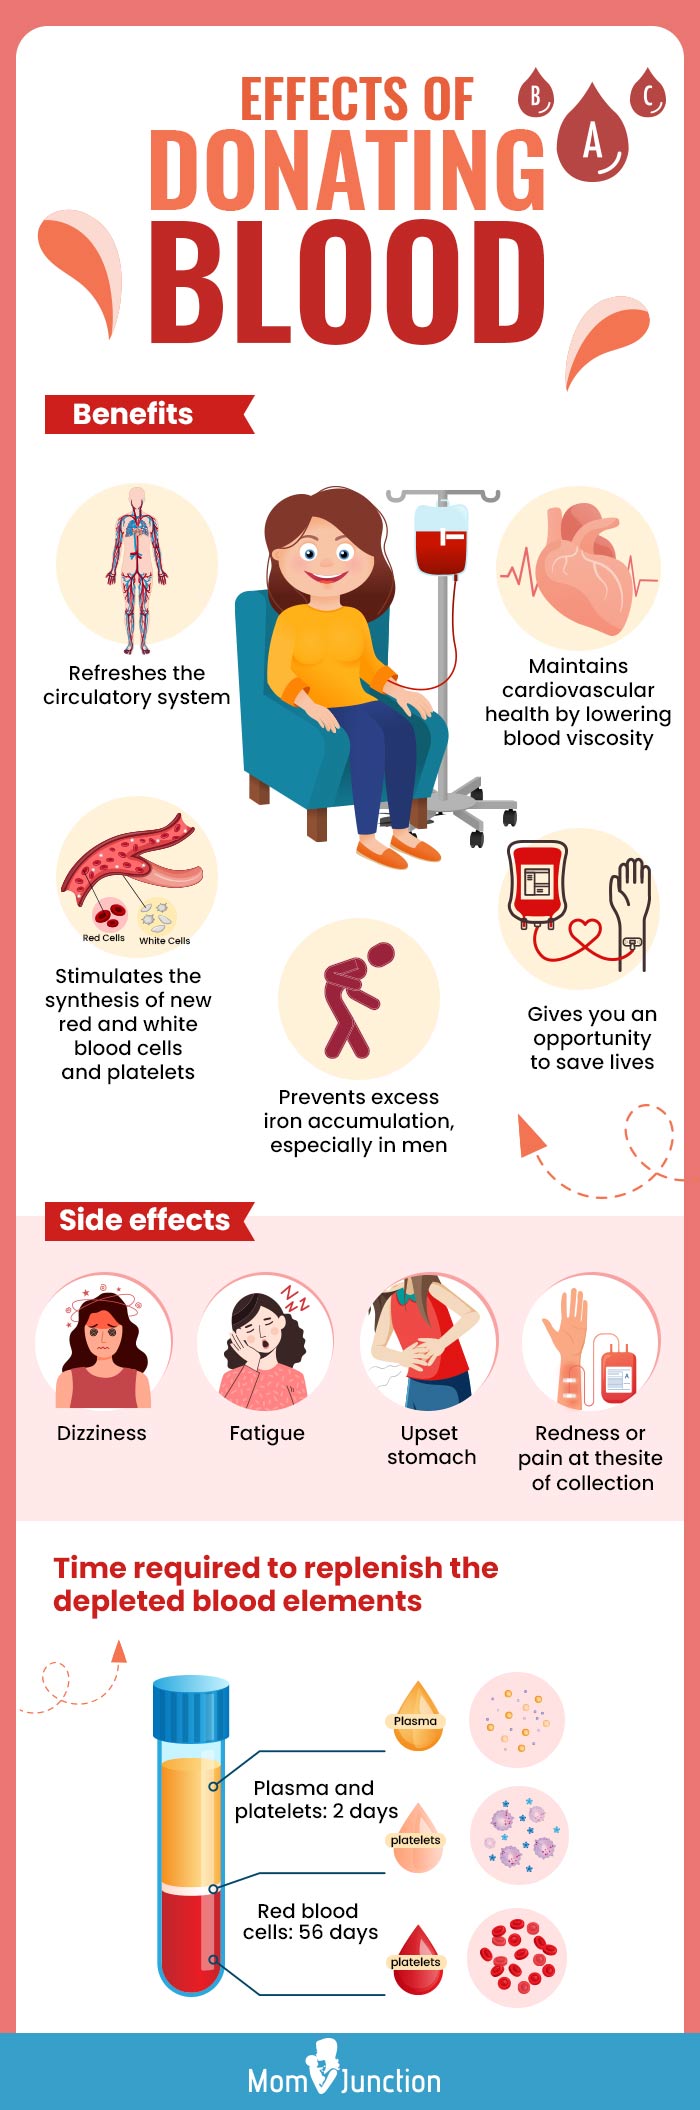 what happens to the body after donating blood [infographic]